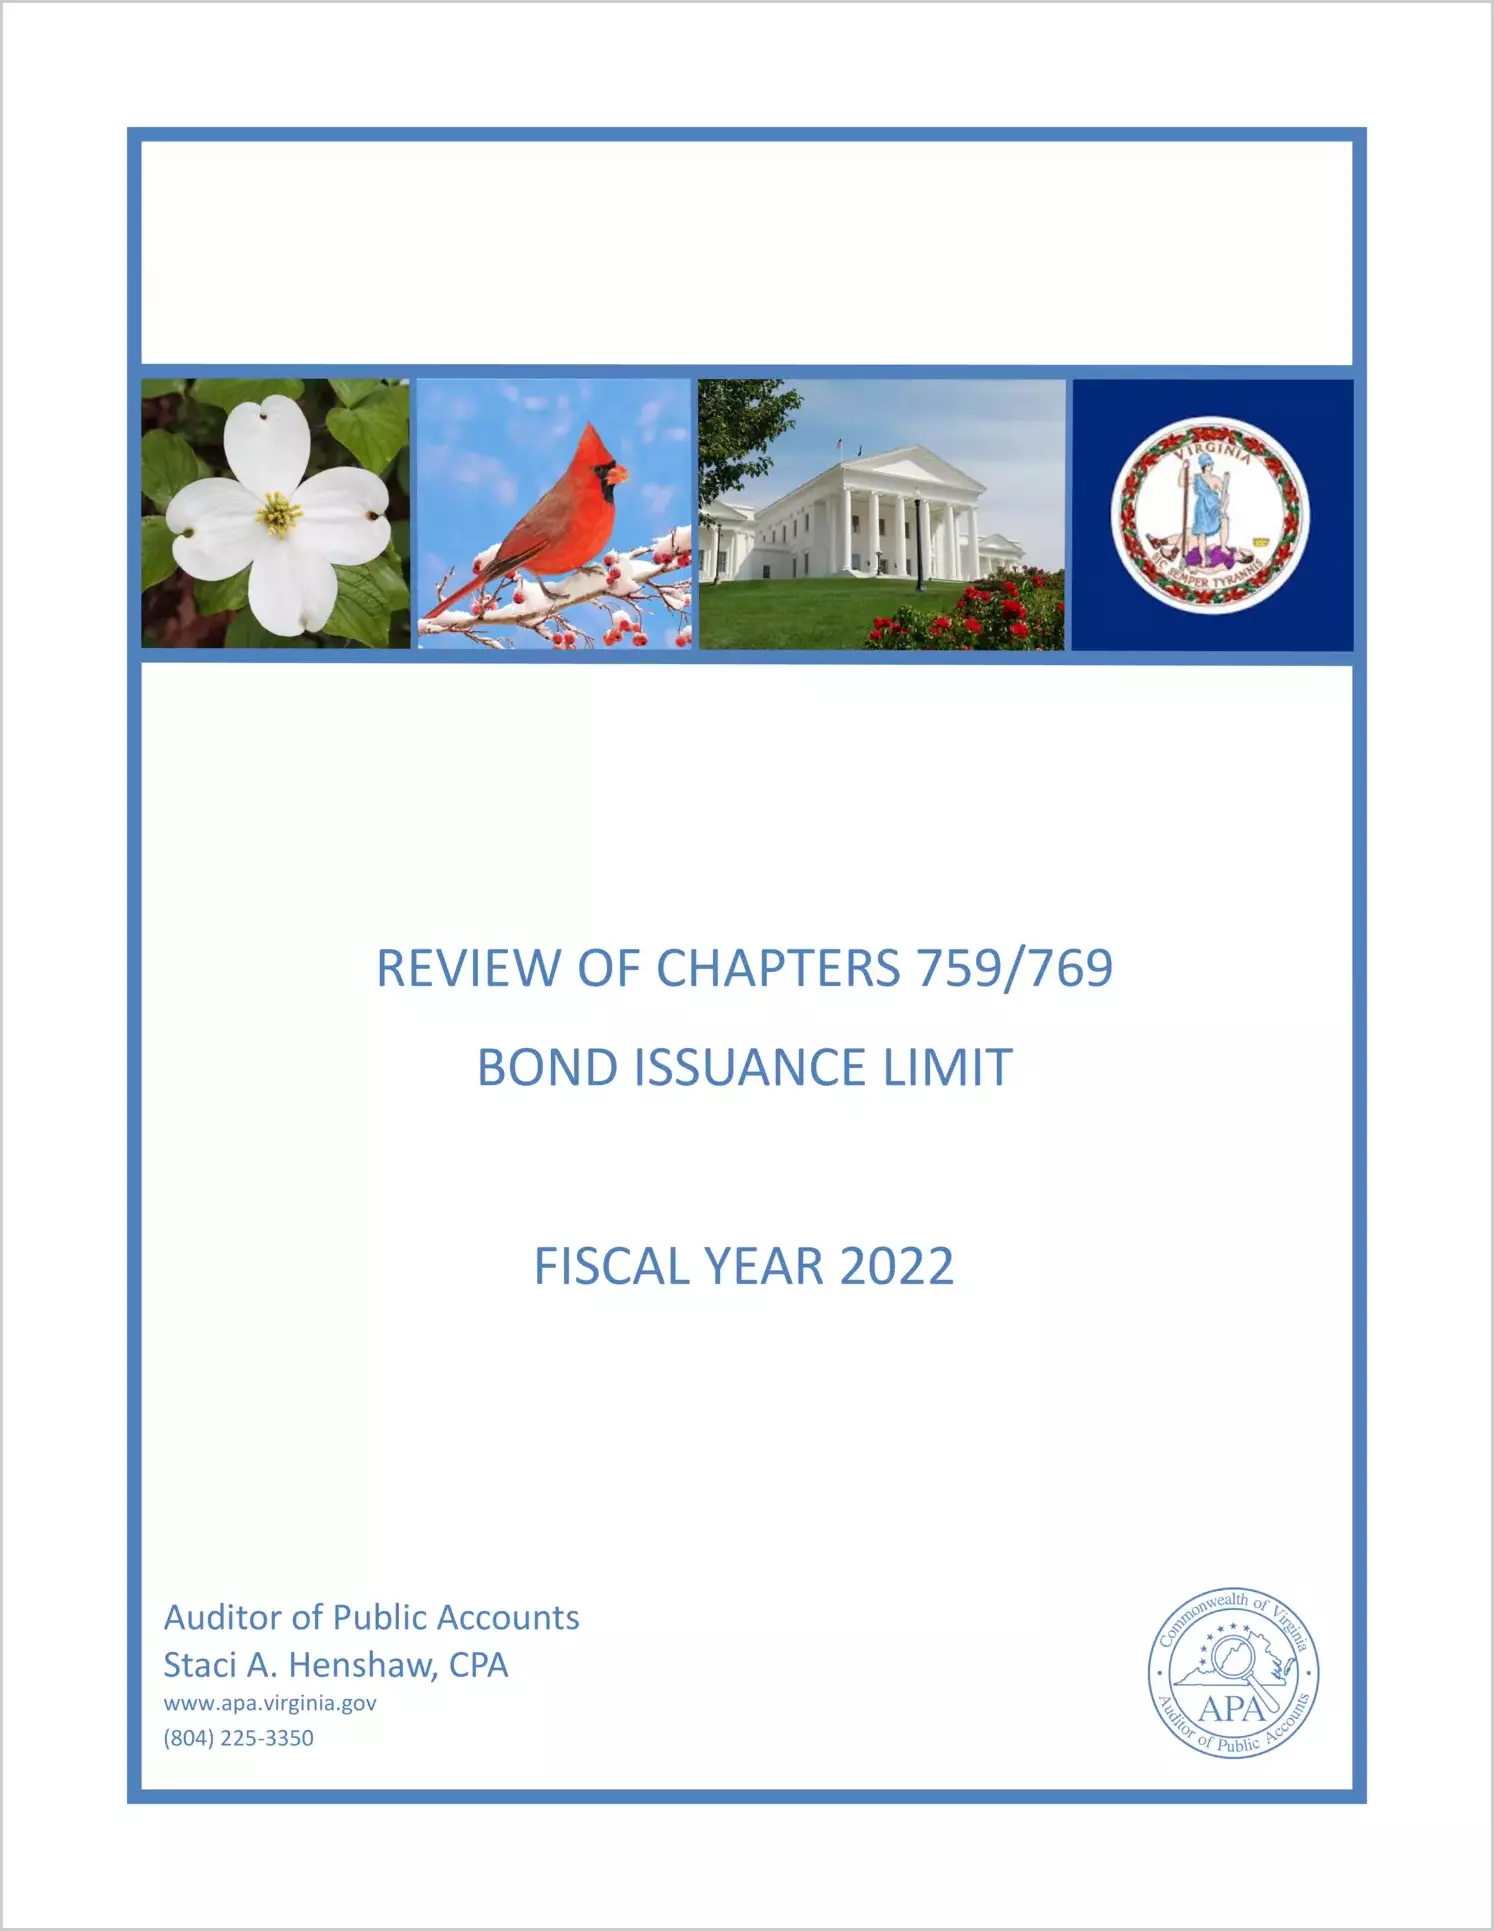 Review of Chapters 759/769 Bond Issuance Limit 2022